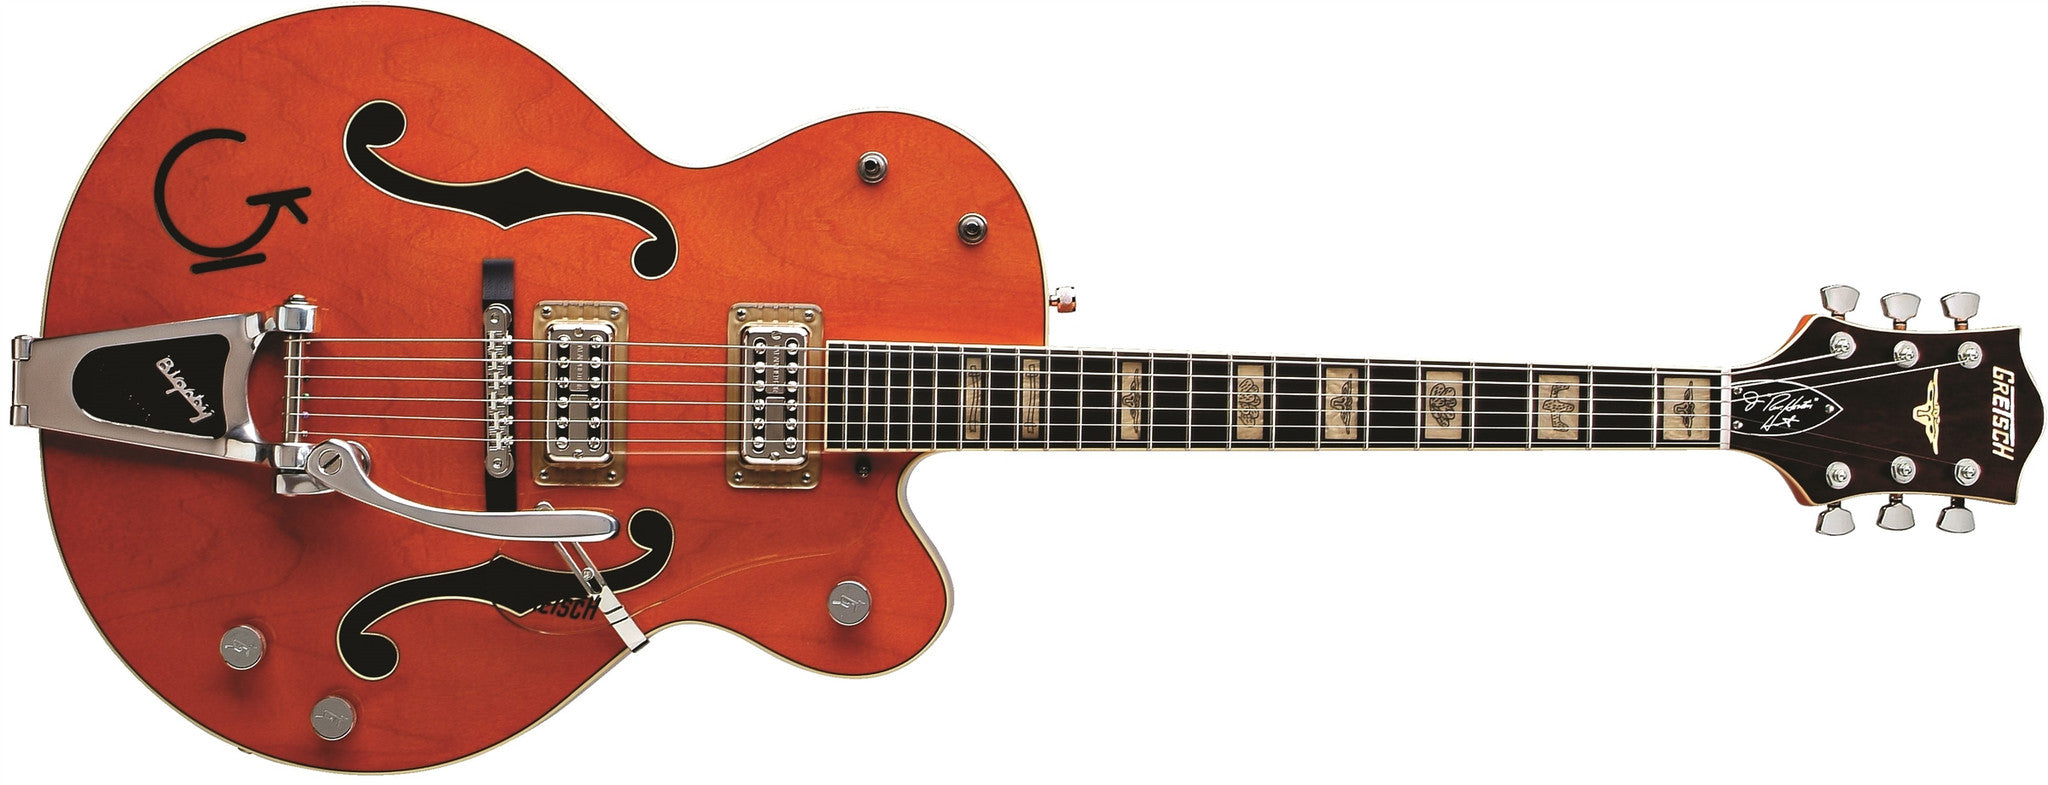 Gretsch G6120RHH Reverend Horton Heat Signature Hollow Body with Bigsby, Ebony Fingerboard, Orange Stain, Lacquer 2401217822 - L.A. Music - Canada's Favourite Music Store!